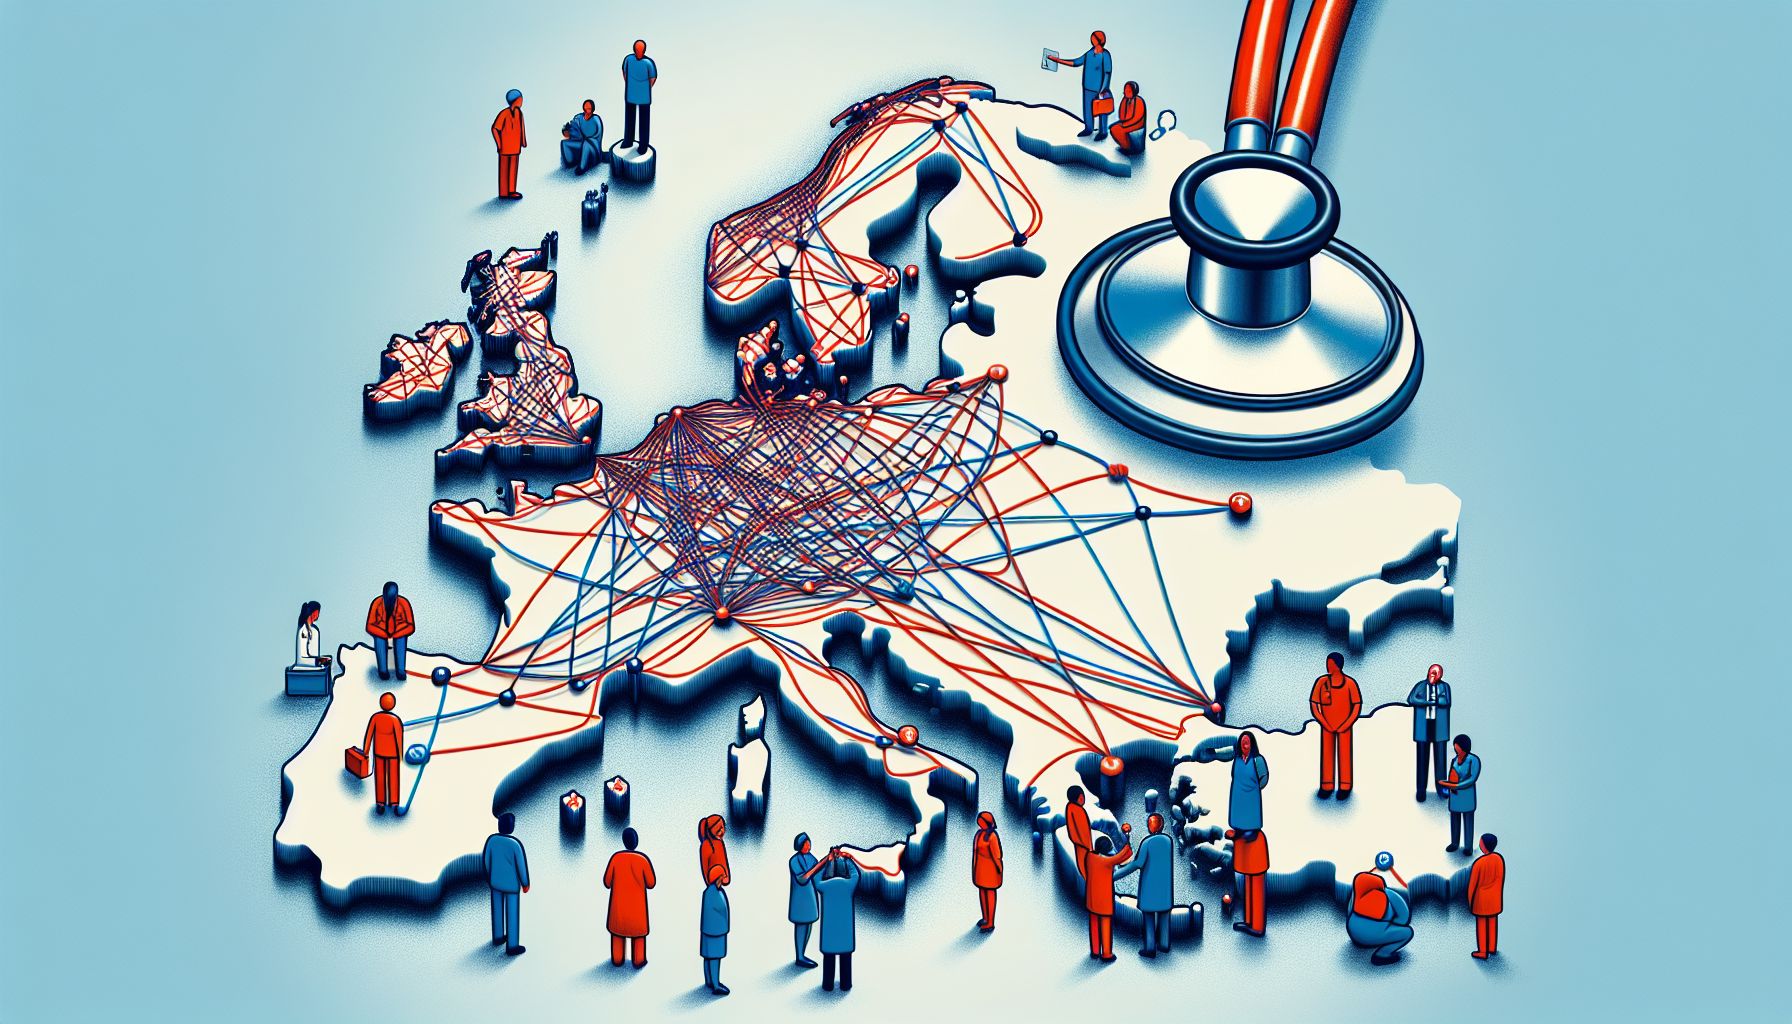 The Preparedness and Response of European Health Systems: A Review of the Challenging Times